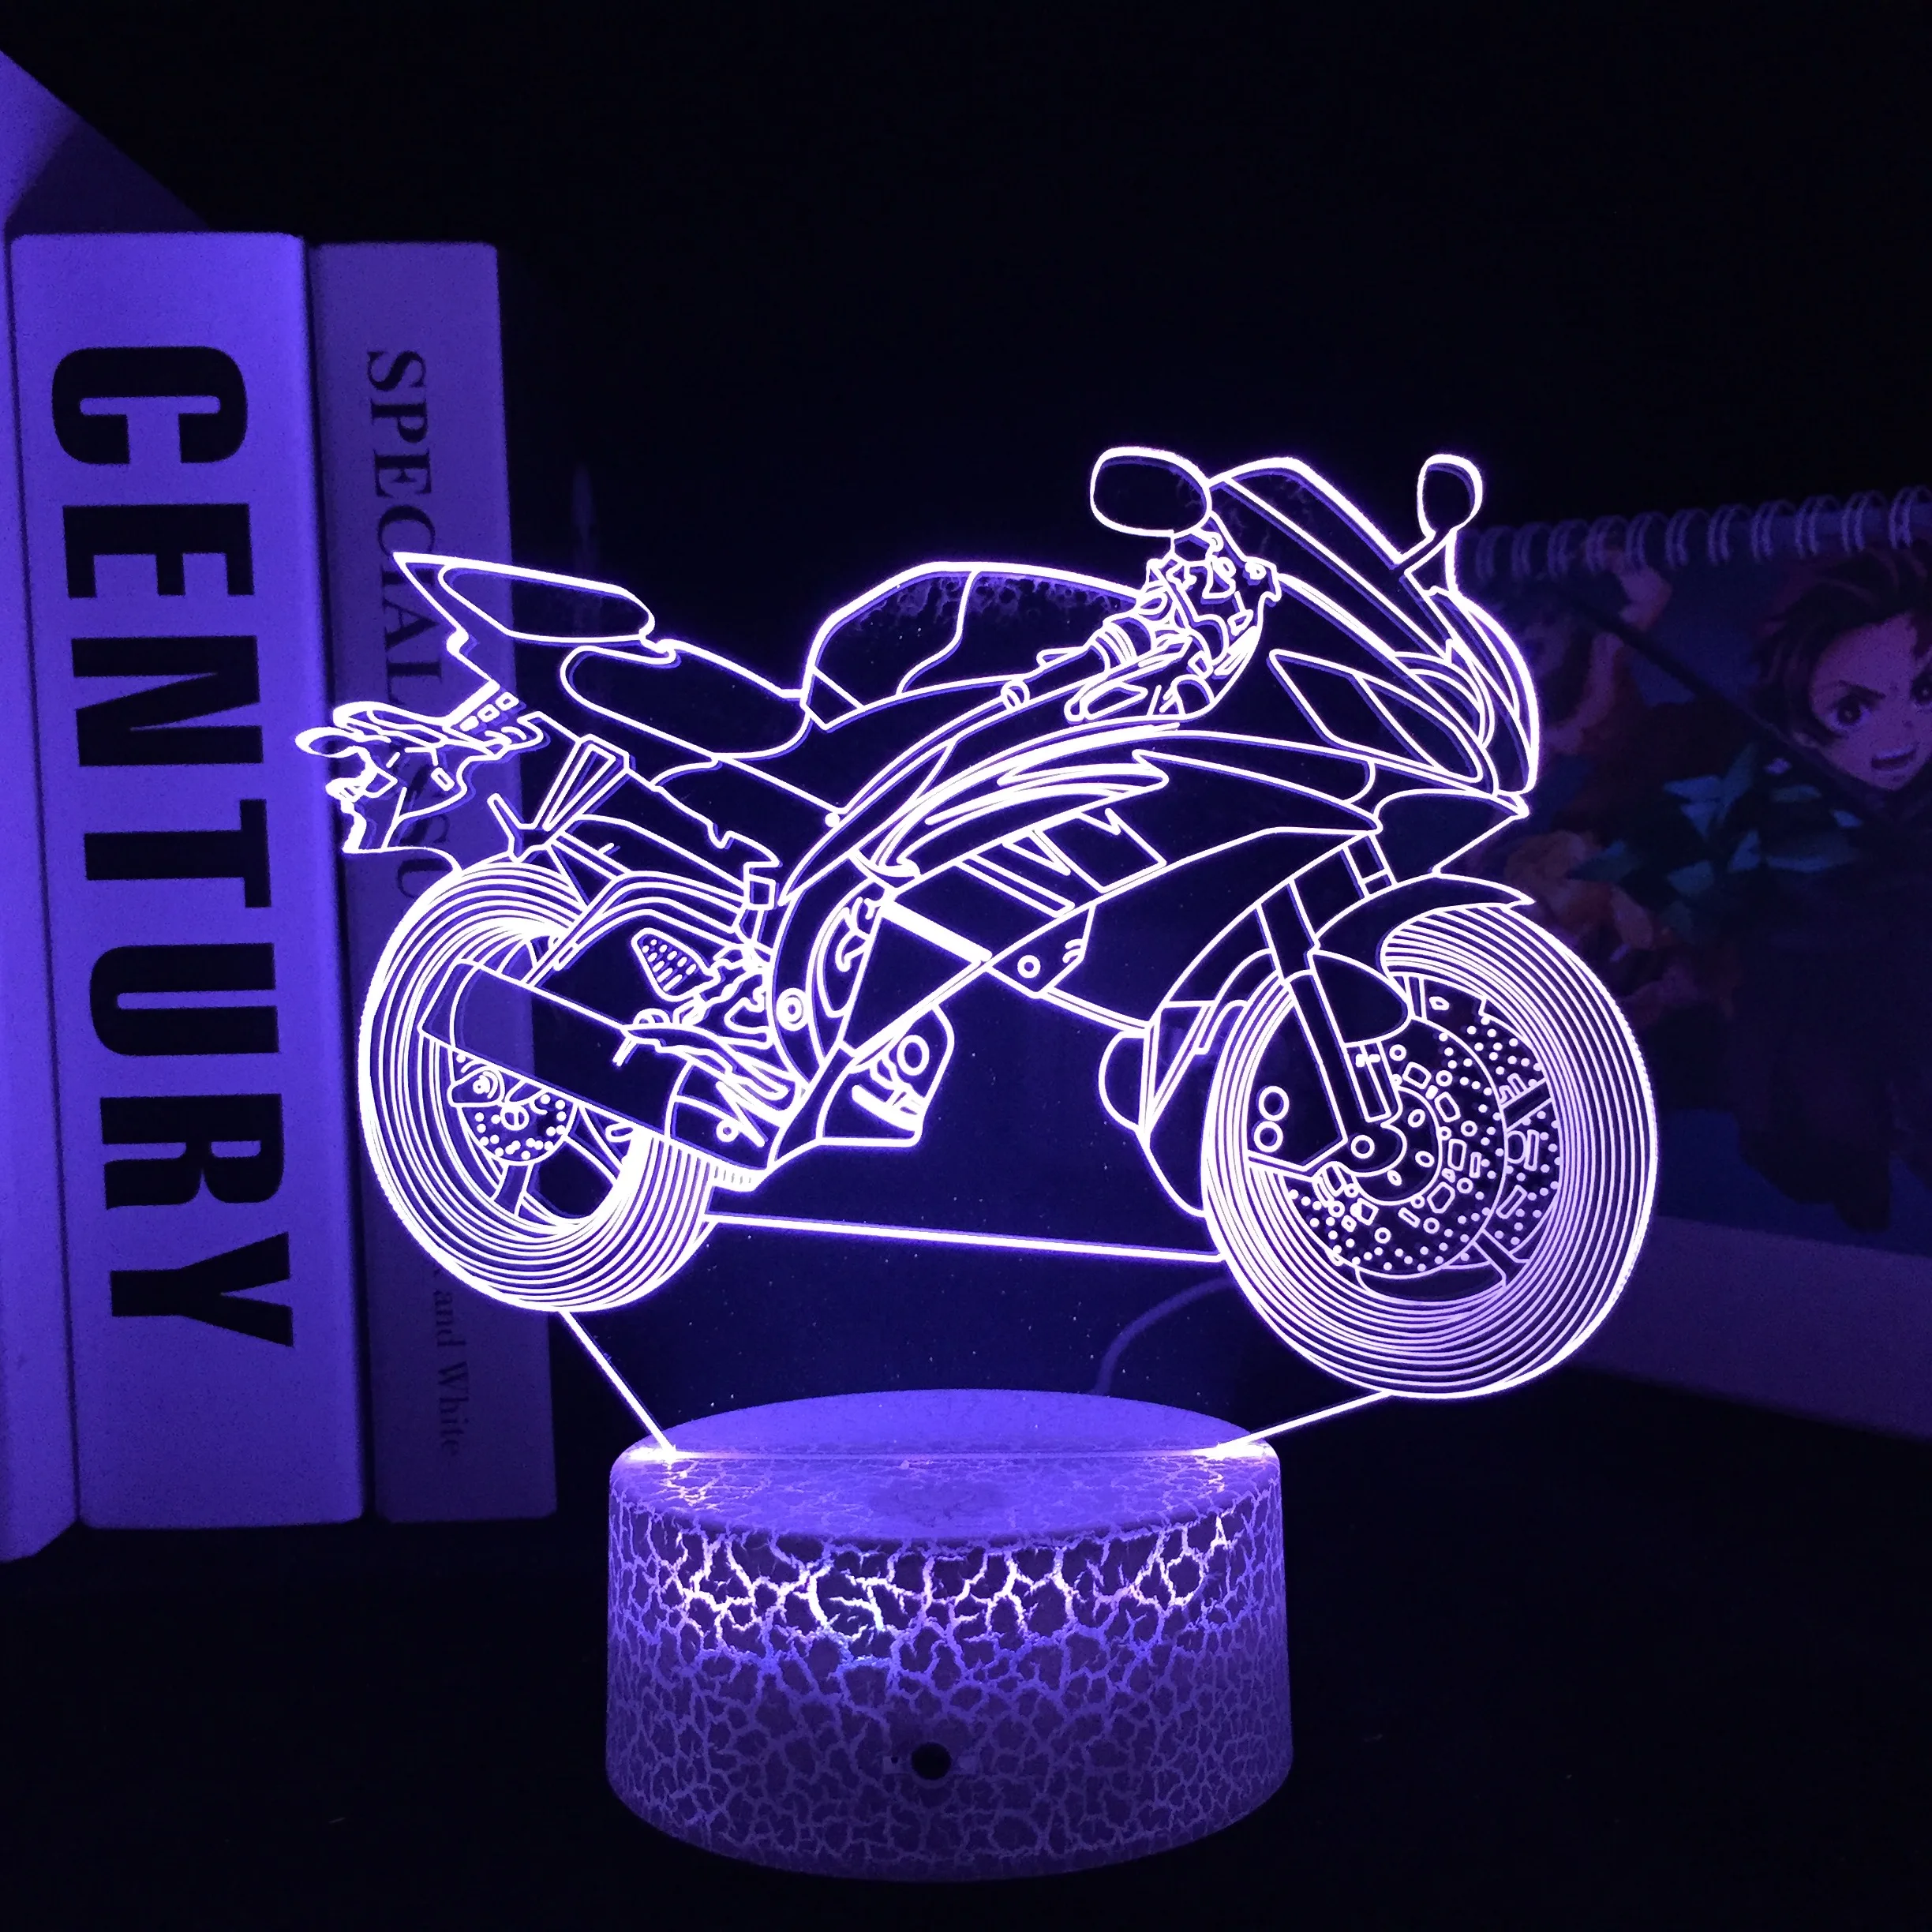 

Motocycle Nightlight 3D Illusion Lamp for Child Bedroom Decor Color Changing Atmosphere LED Night Light Birthday Gift Dropship